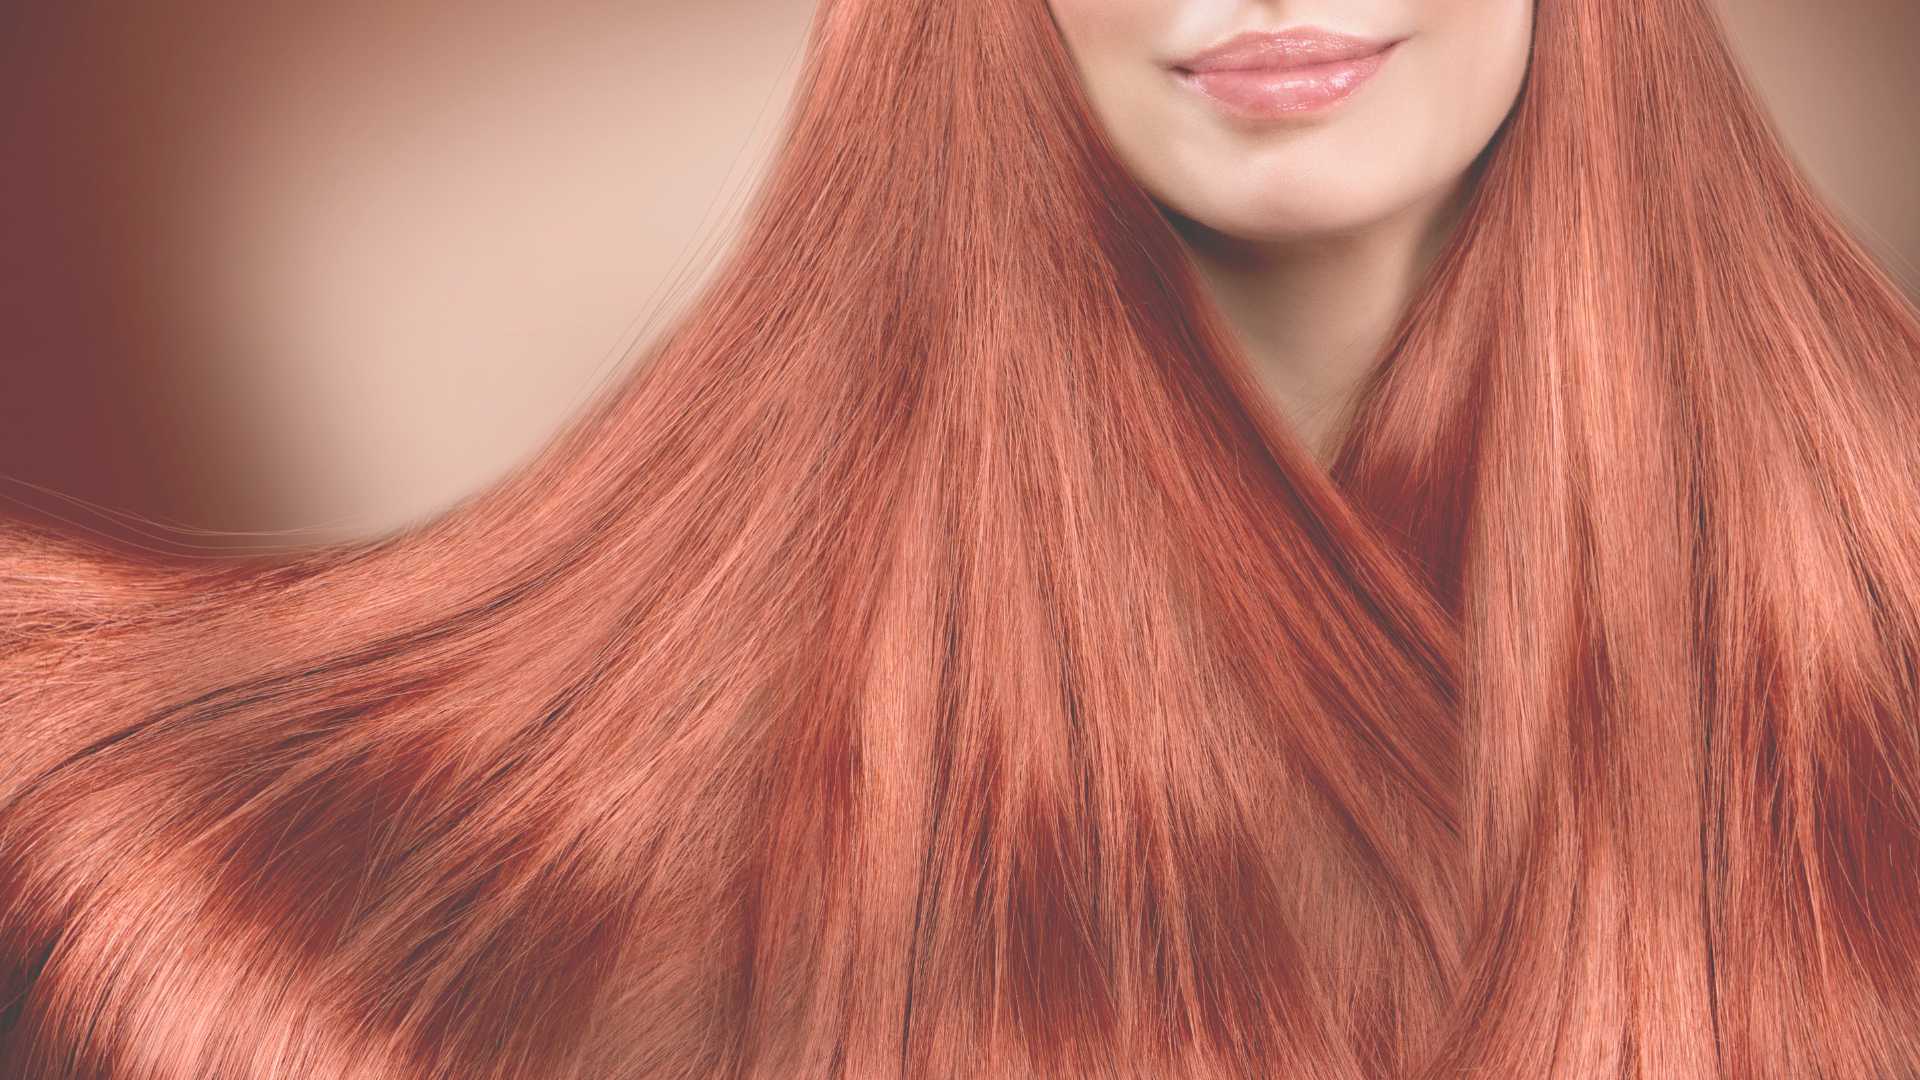 This Is Why It’s Important For Redheads To Have Healthy Hair